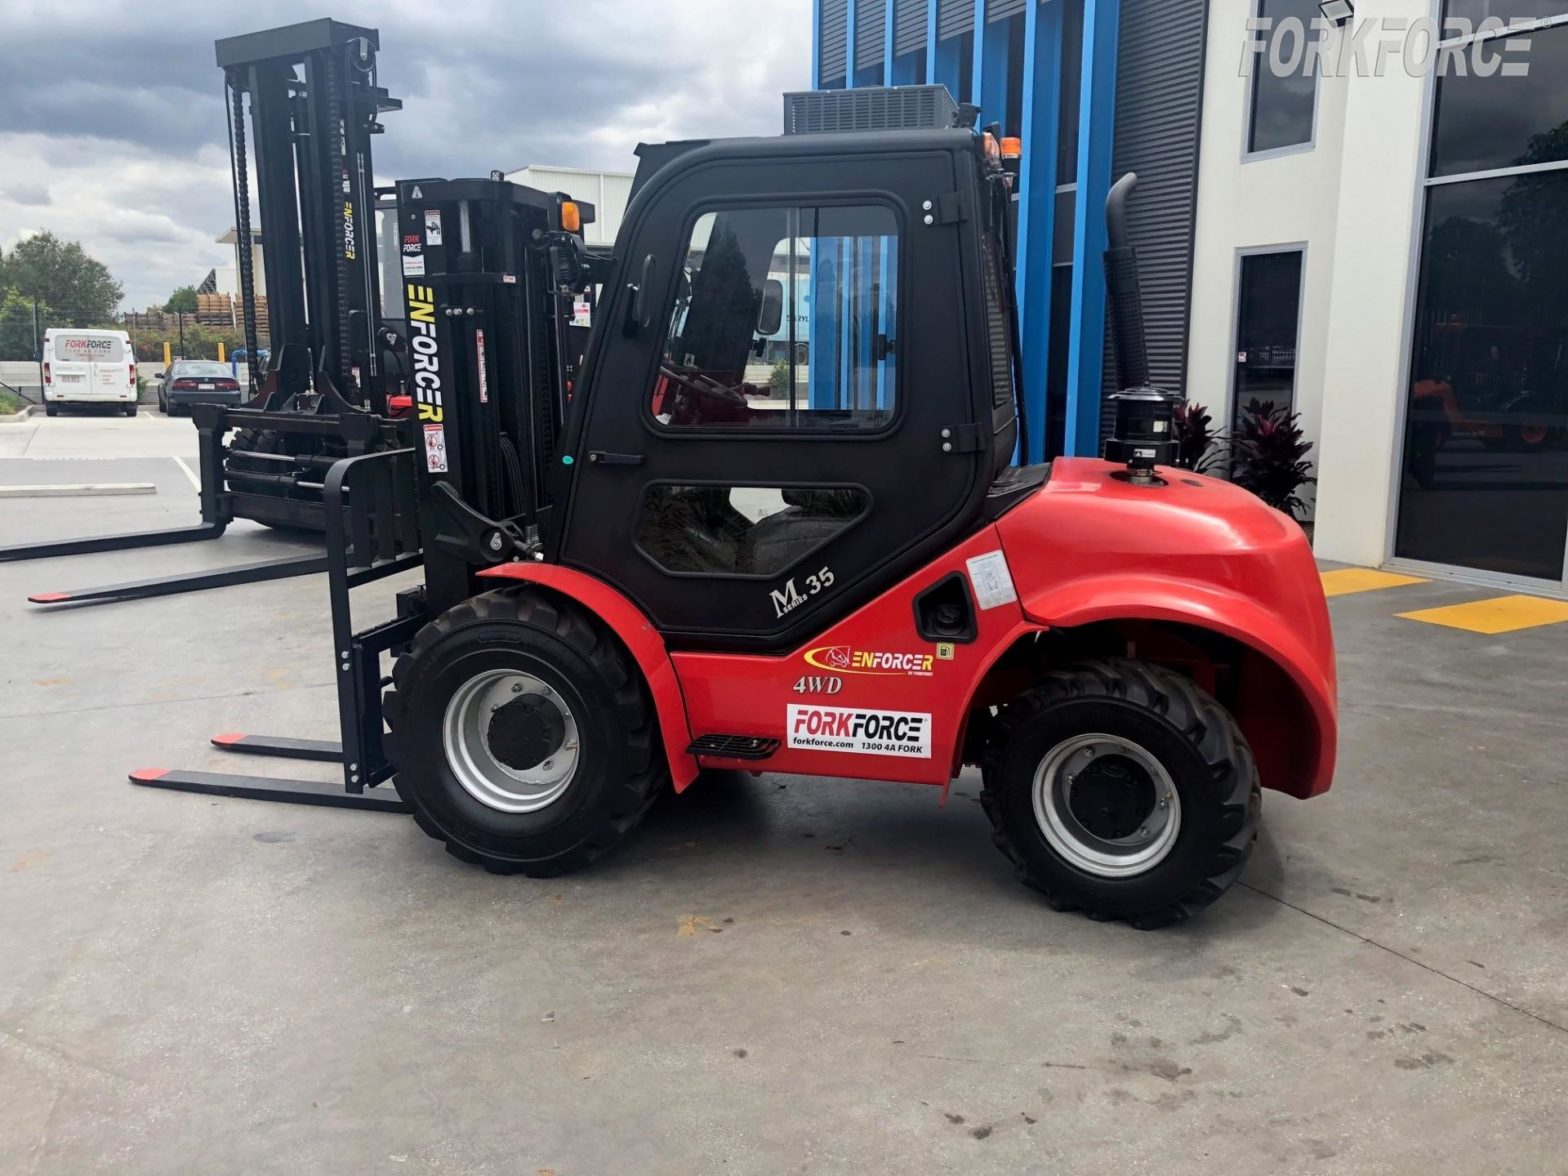 All-Terrain Forklift for Hire